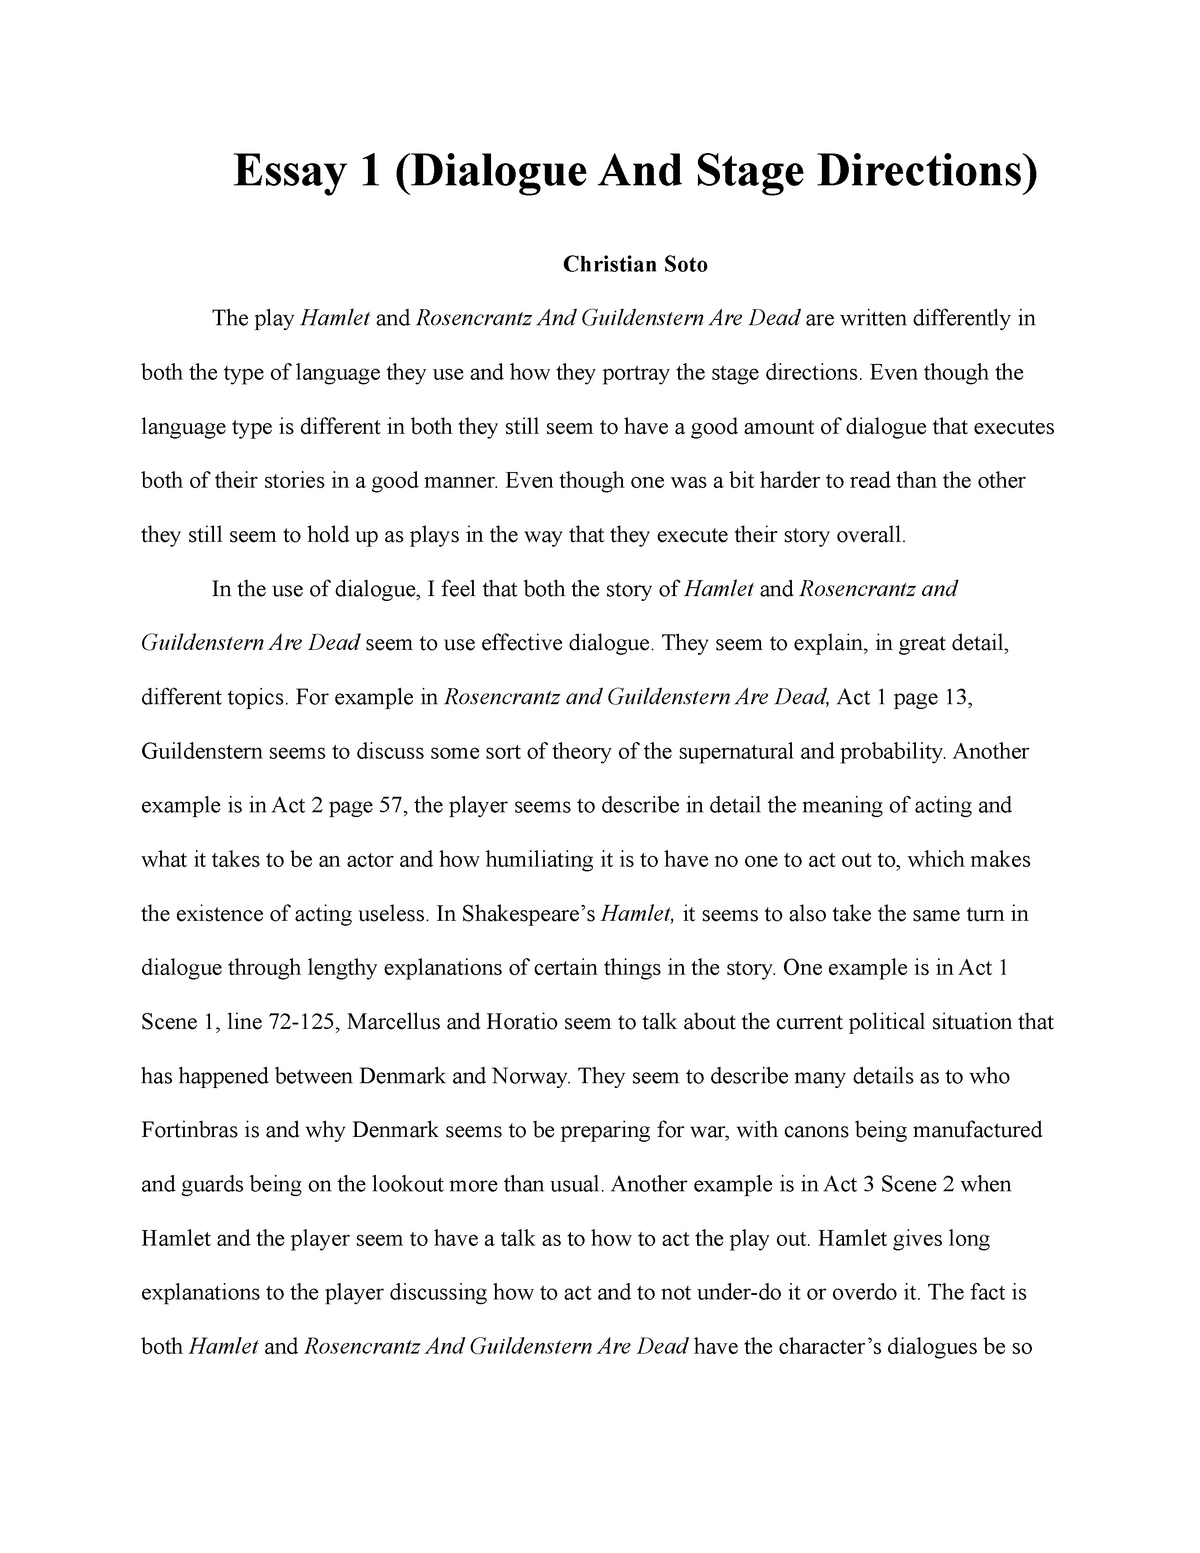 essay about dialogue